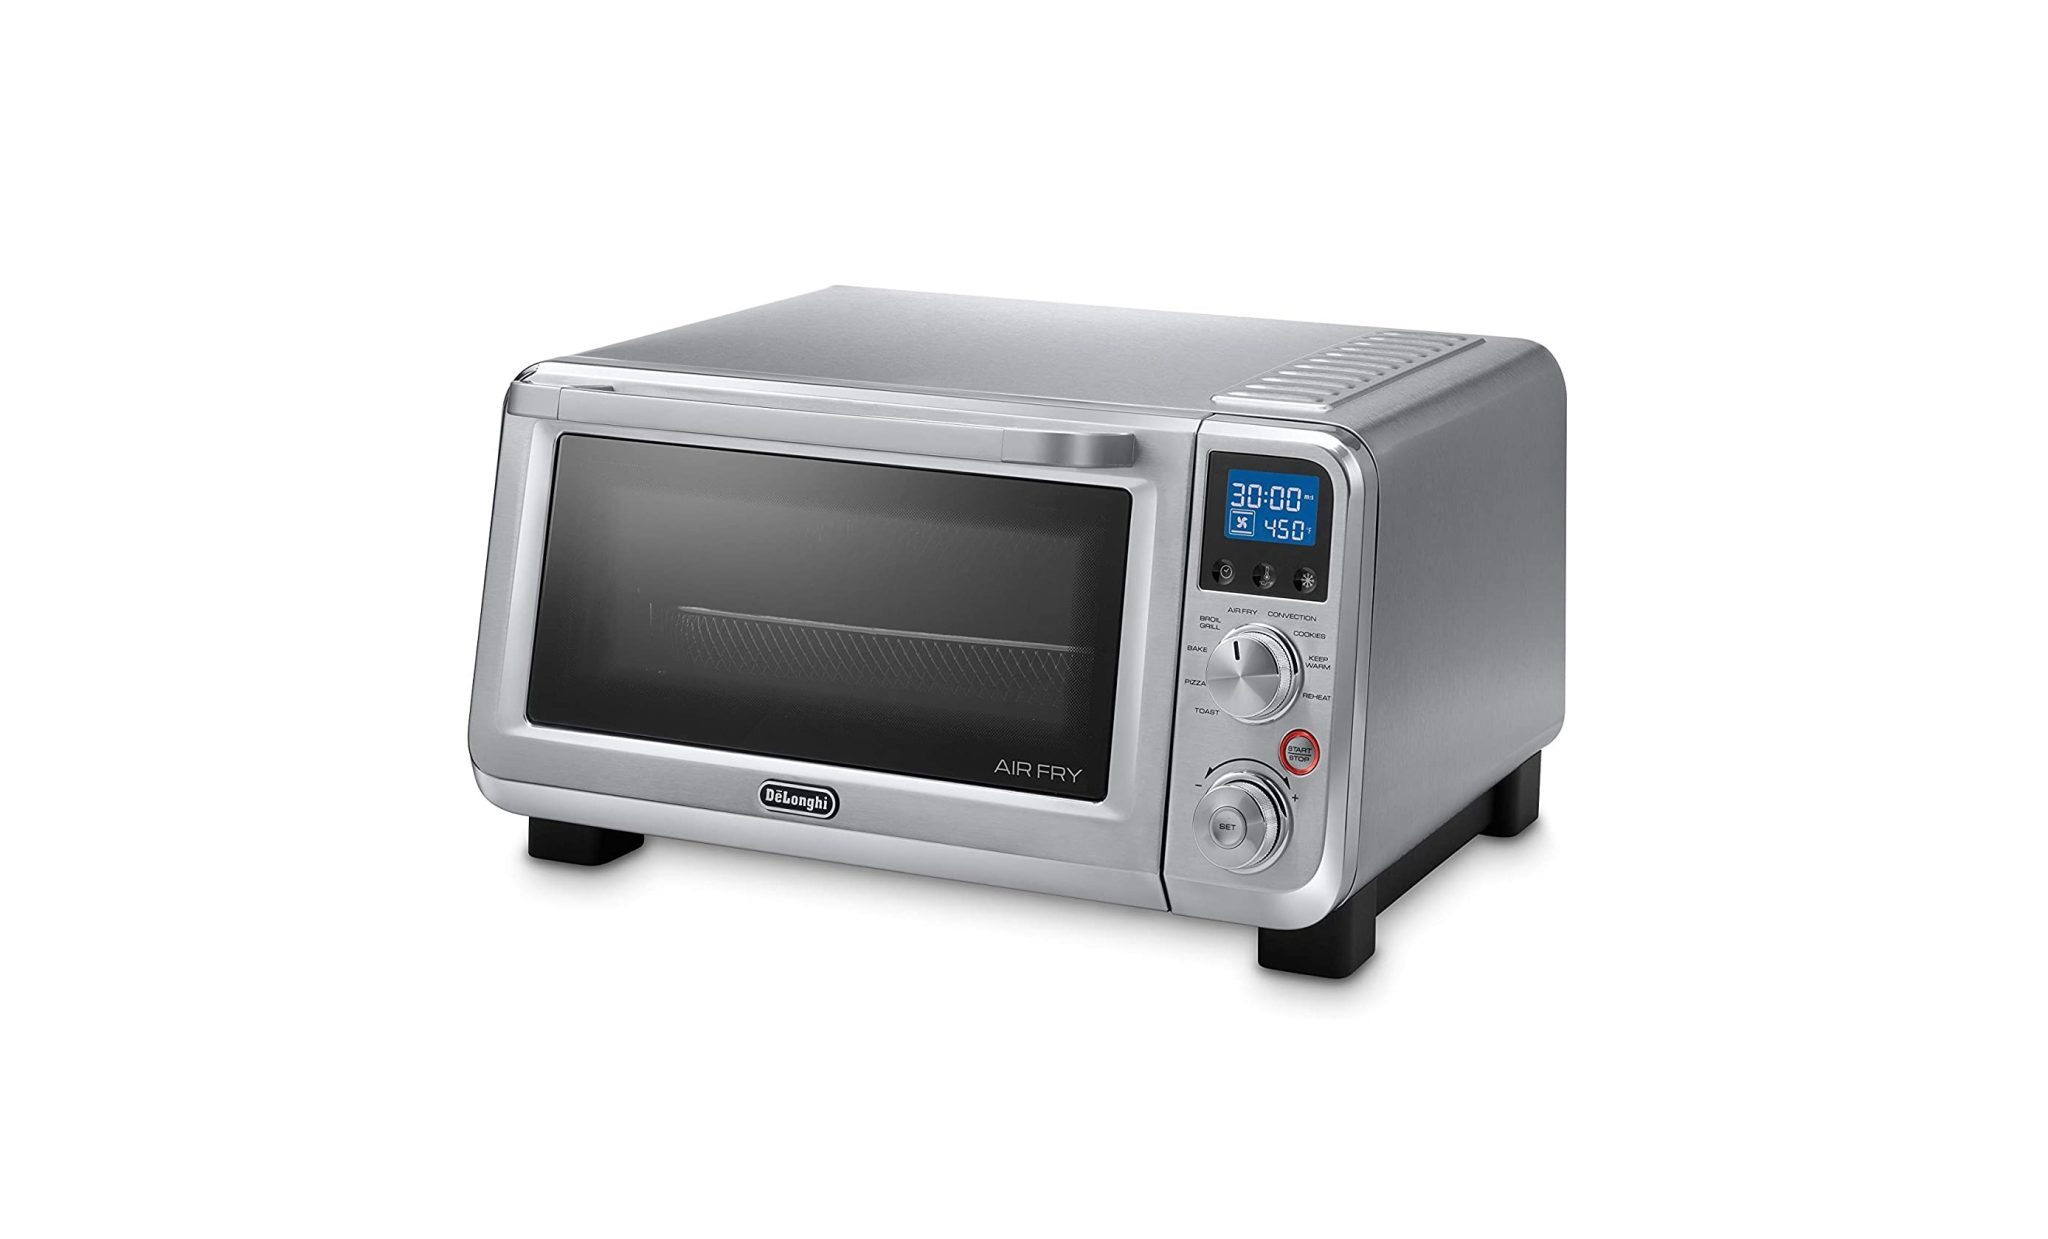 EO141164M Livenza 9-in-1 Digital Air Fry Convection Toaster Oven